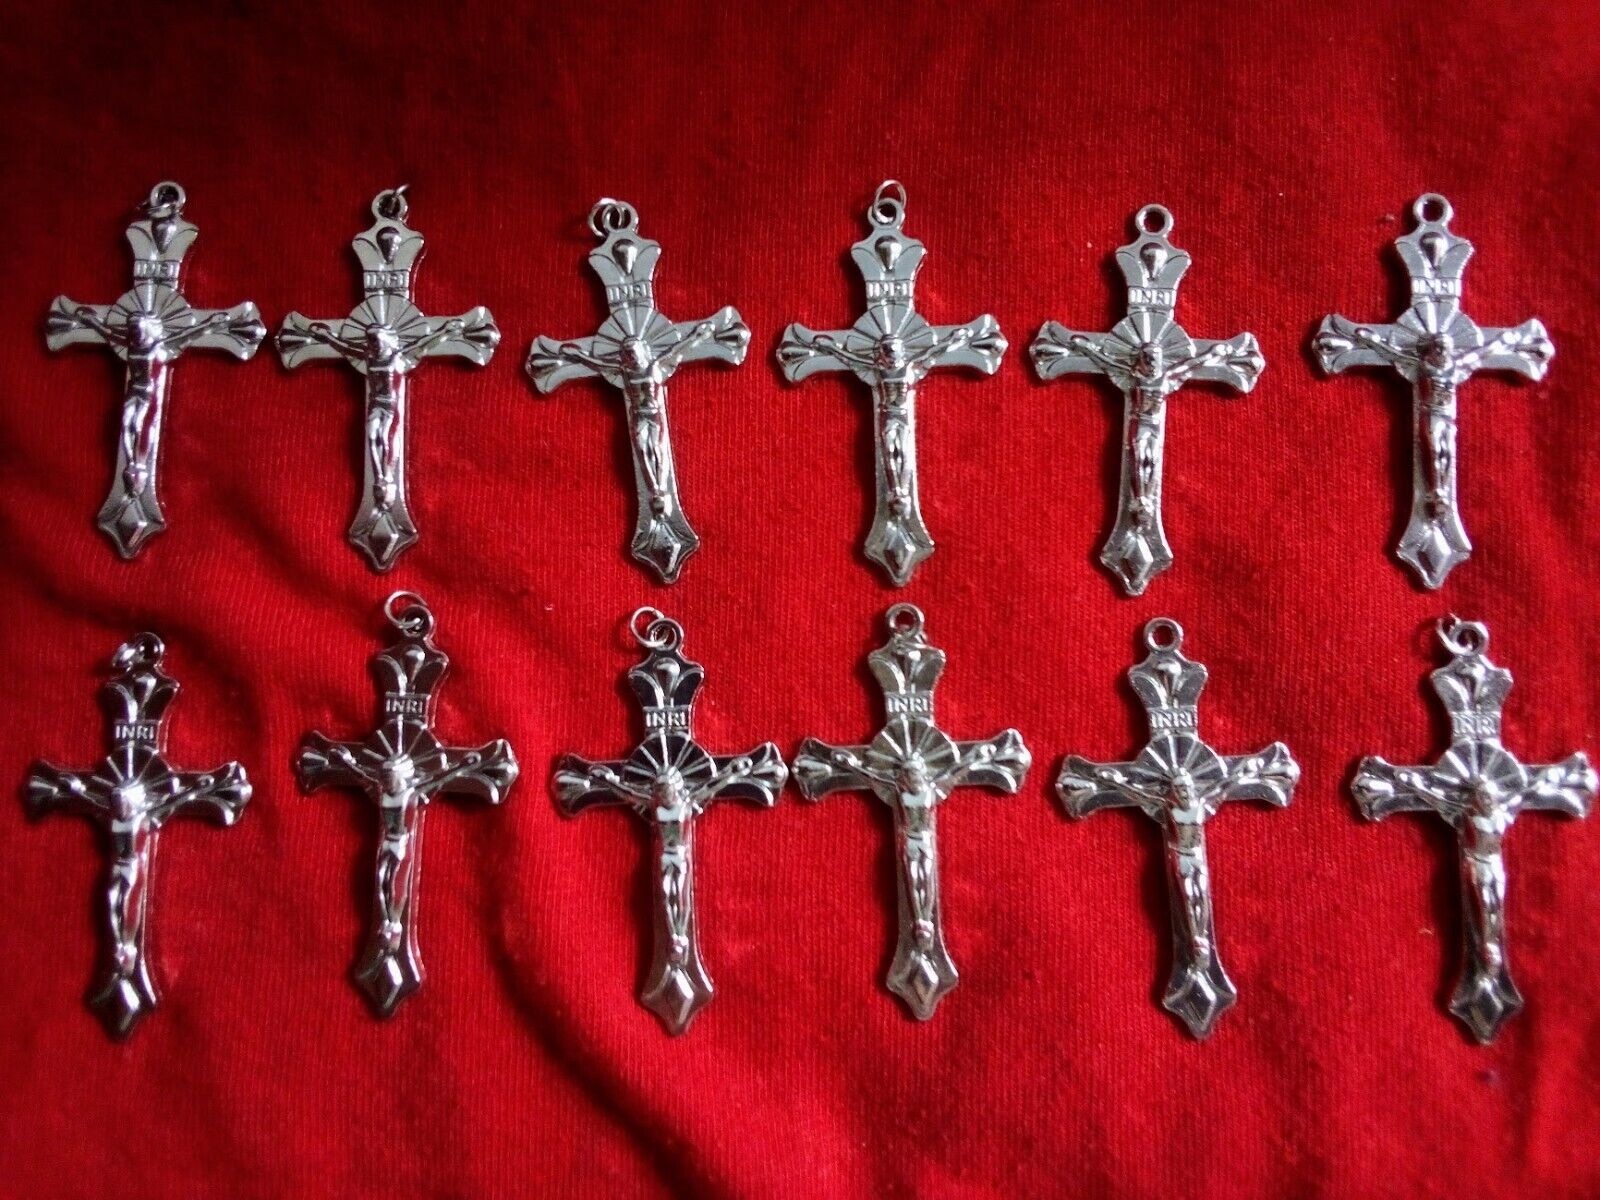 Lot of 12 CRUCIFIXES FOR ROSARIES Catholic Rosary parts prayer beads Holy Mary